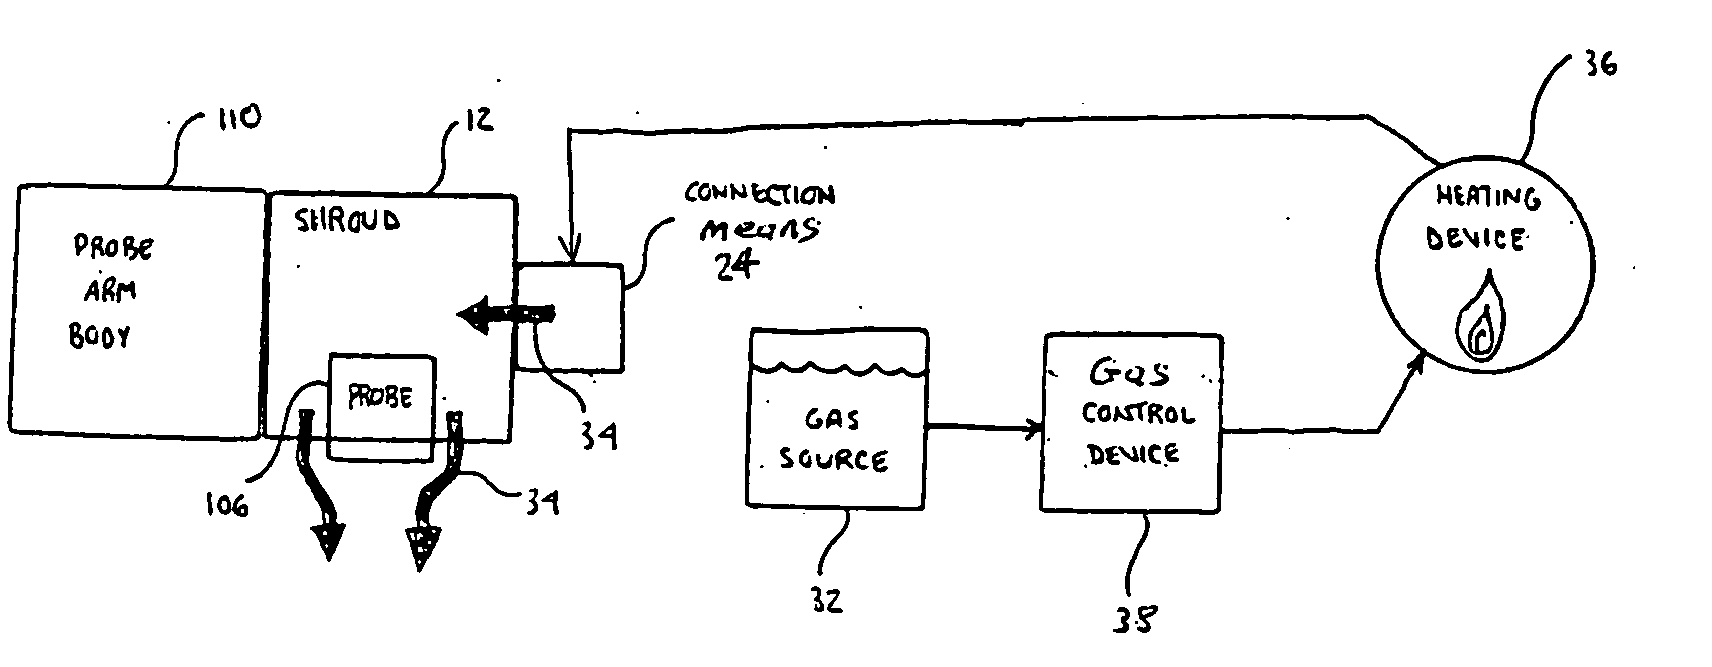 Method and apparatus for removing and/or preventing surface contamination of a probe